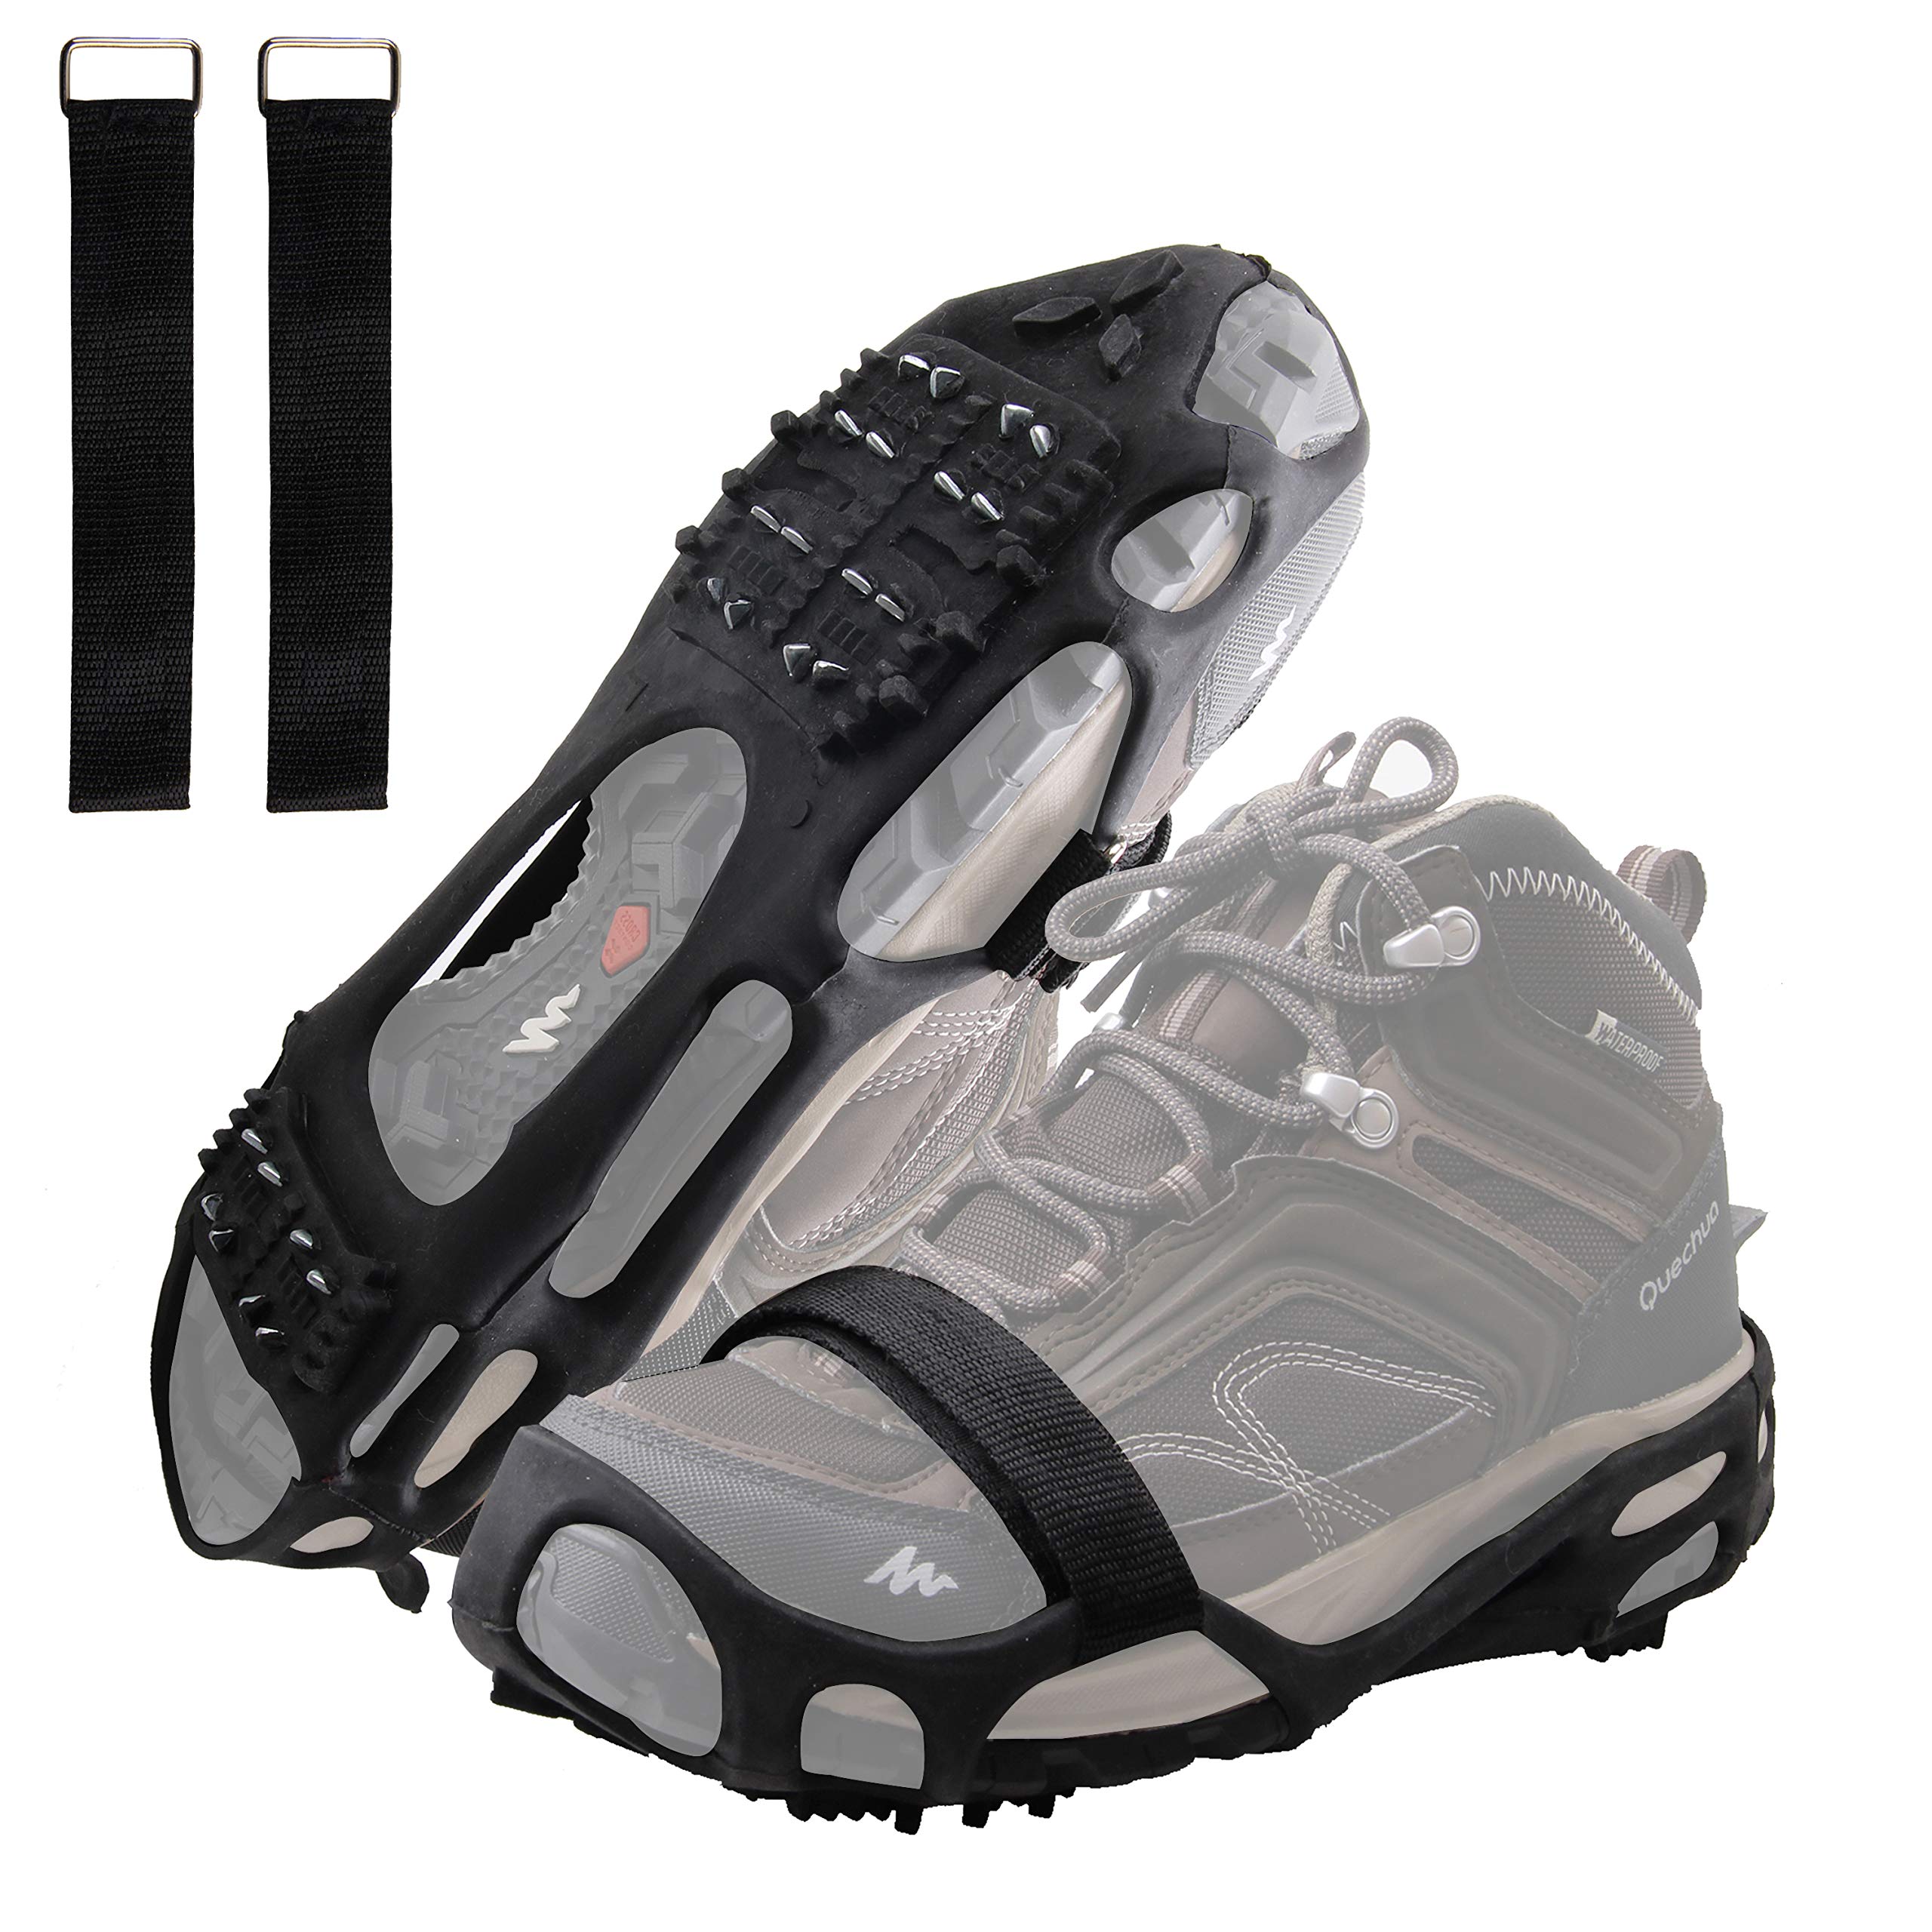 Ice Cleats Snow Traction Cleats Crampon for Walking on Snow and Ice Non-Slip  Overshoe Rubber